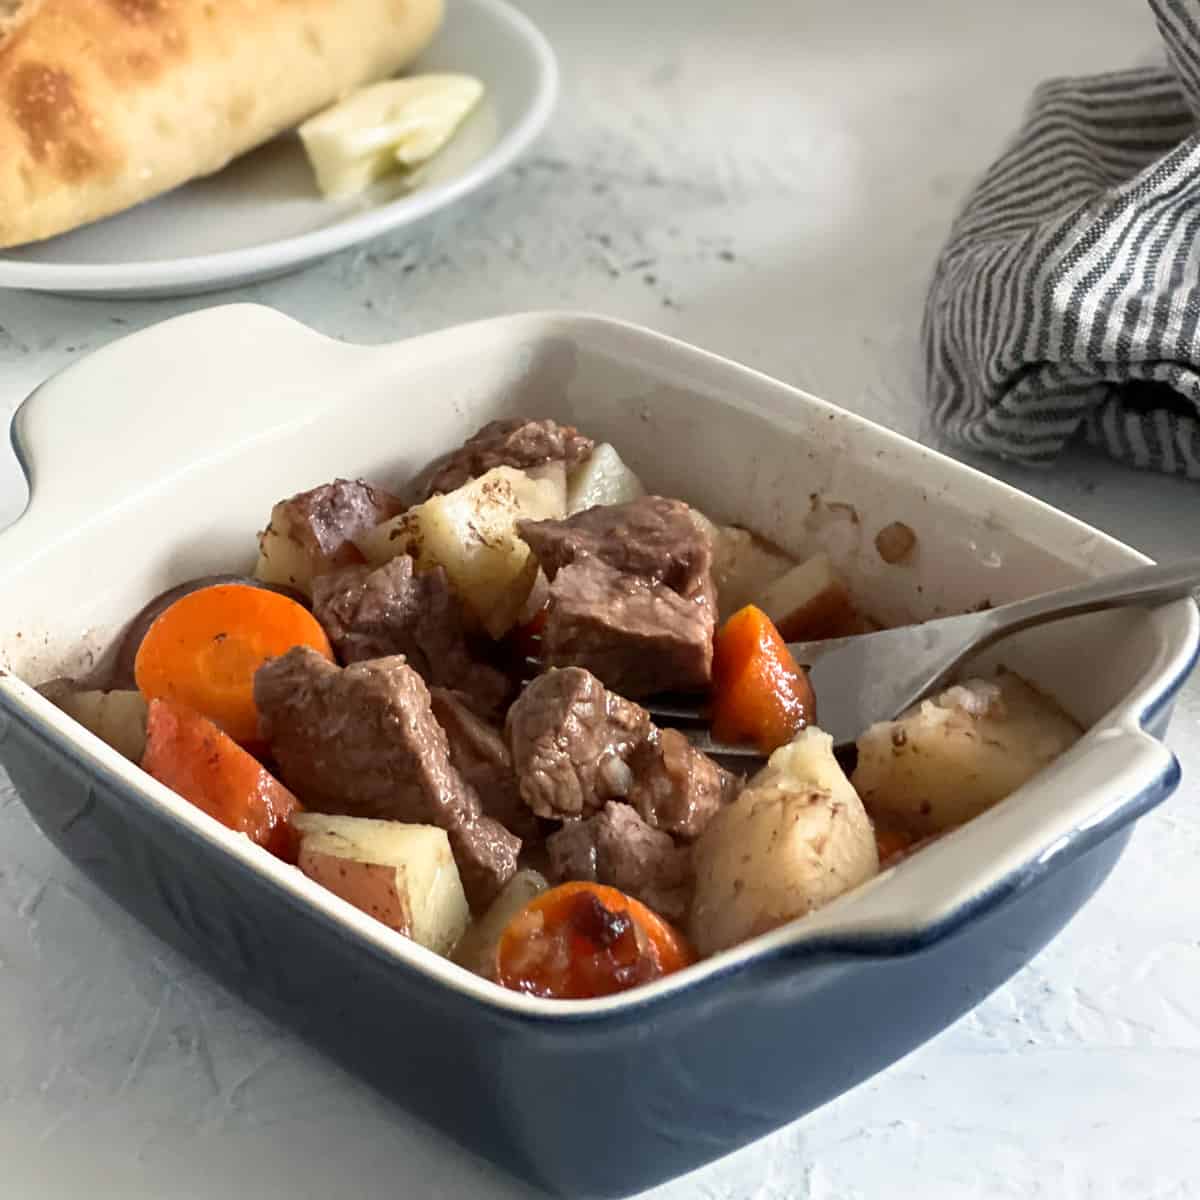 Baked beef stew casserole in blue baking dish with striped napkin and bread plate on side.